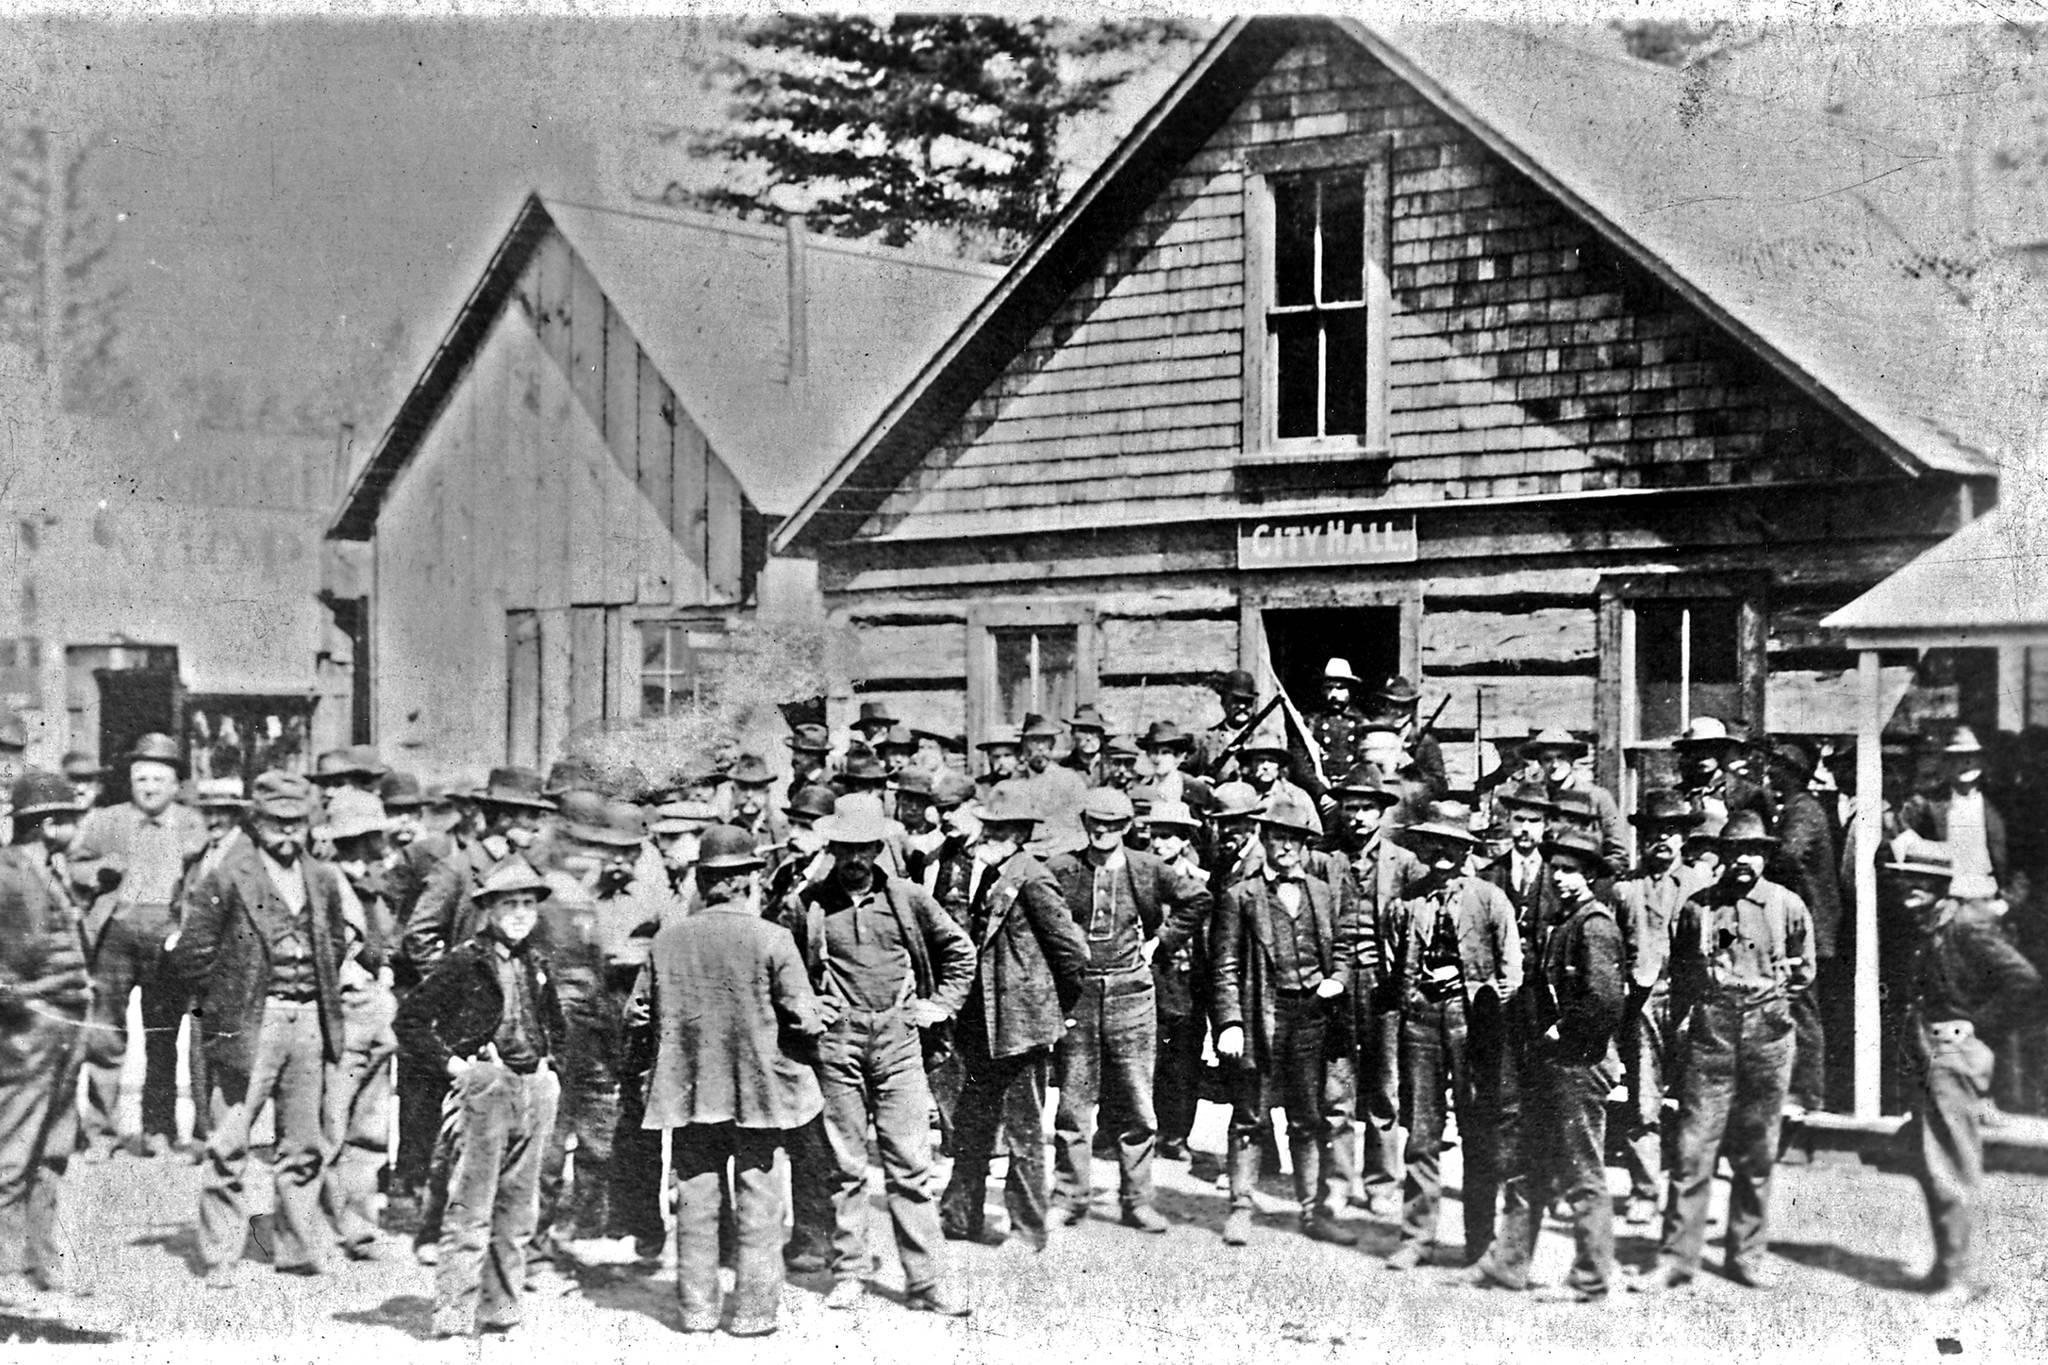 This is the only known photograph we have of the interior of Skagway’s First City Hall during its time period as the town’s city hall. George A. Brackett with his long beard is seated on the immediate right. Brackett was the builder of the Brackett Wagon Road that ran from Skagway to White Pass City. Based on the presence of Brackett, it is possible that this picture represents the start or finish of negotiations between Brackett and the White Pass & Yukon Route railroad over the purchase of the Brackett Wagon Road by the railroad. (National Park Service, Klondike Gold Rush National Historical Park, Brackett Family Collection, BFC/CBD 156; KLGO PB-38-6237)